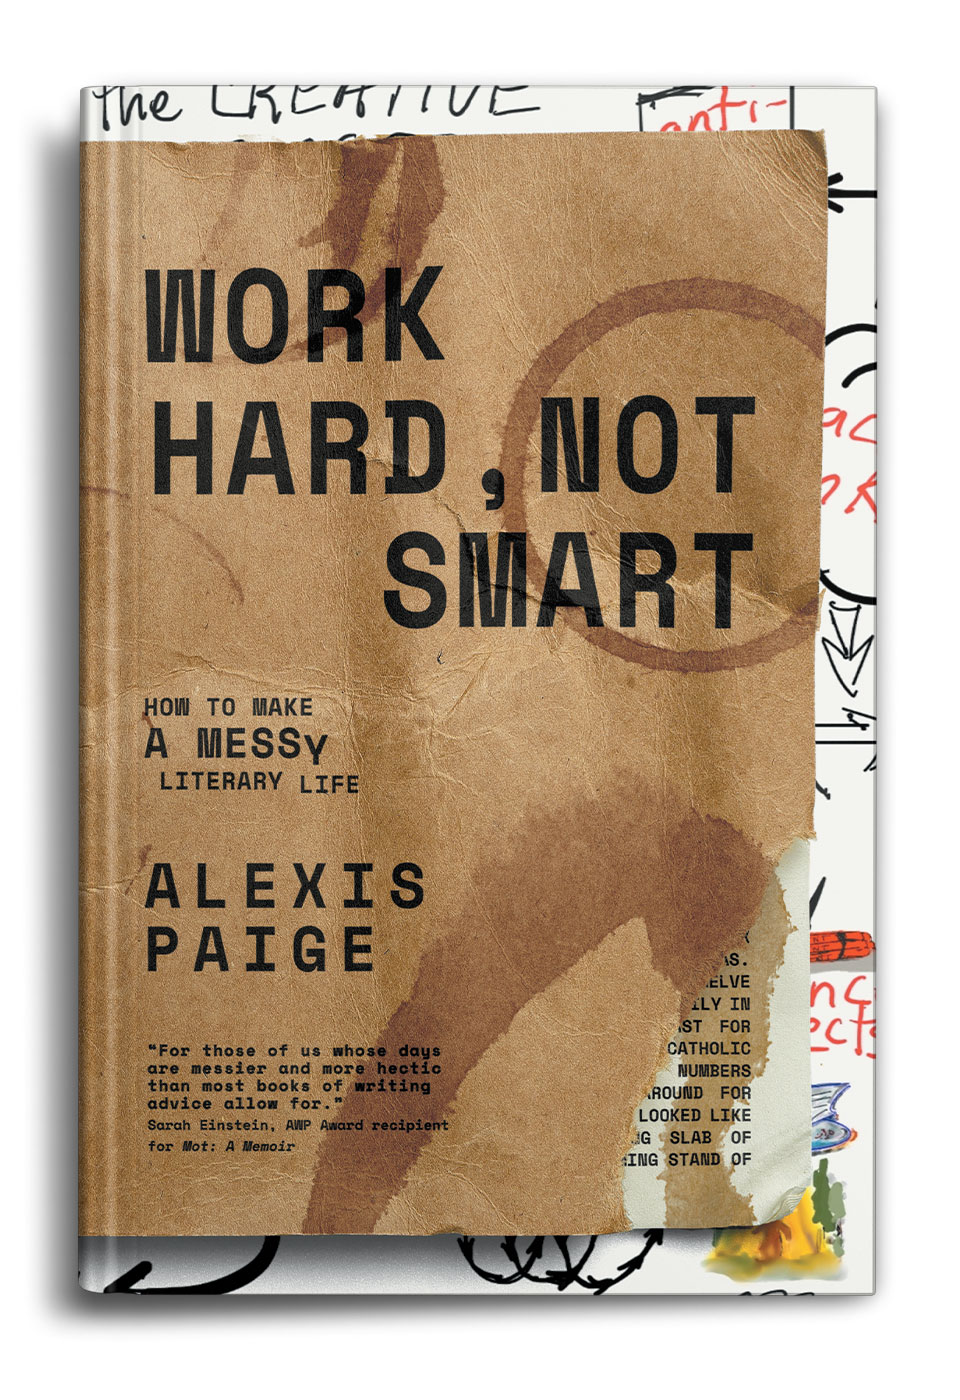 Work-Hard-Not-Smart-by-Alexis-Paige